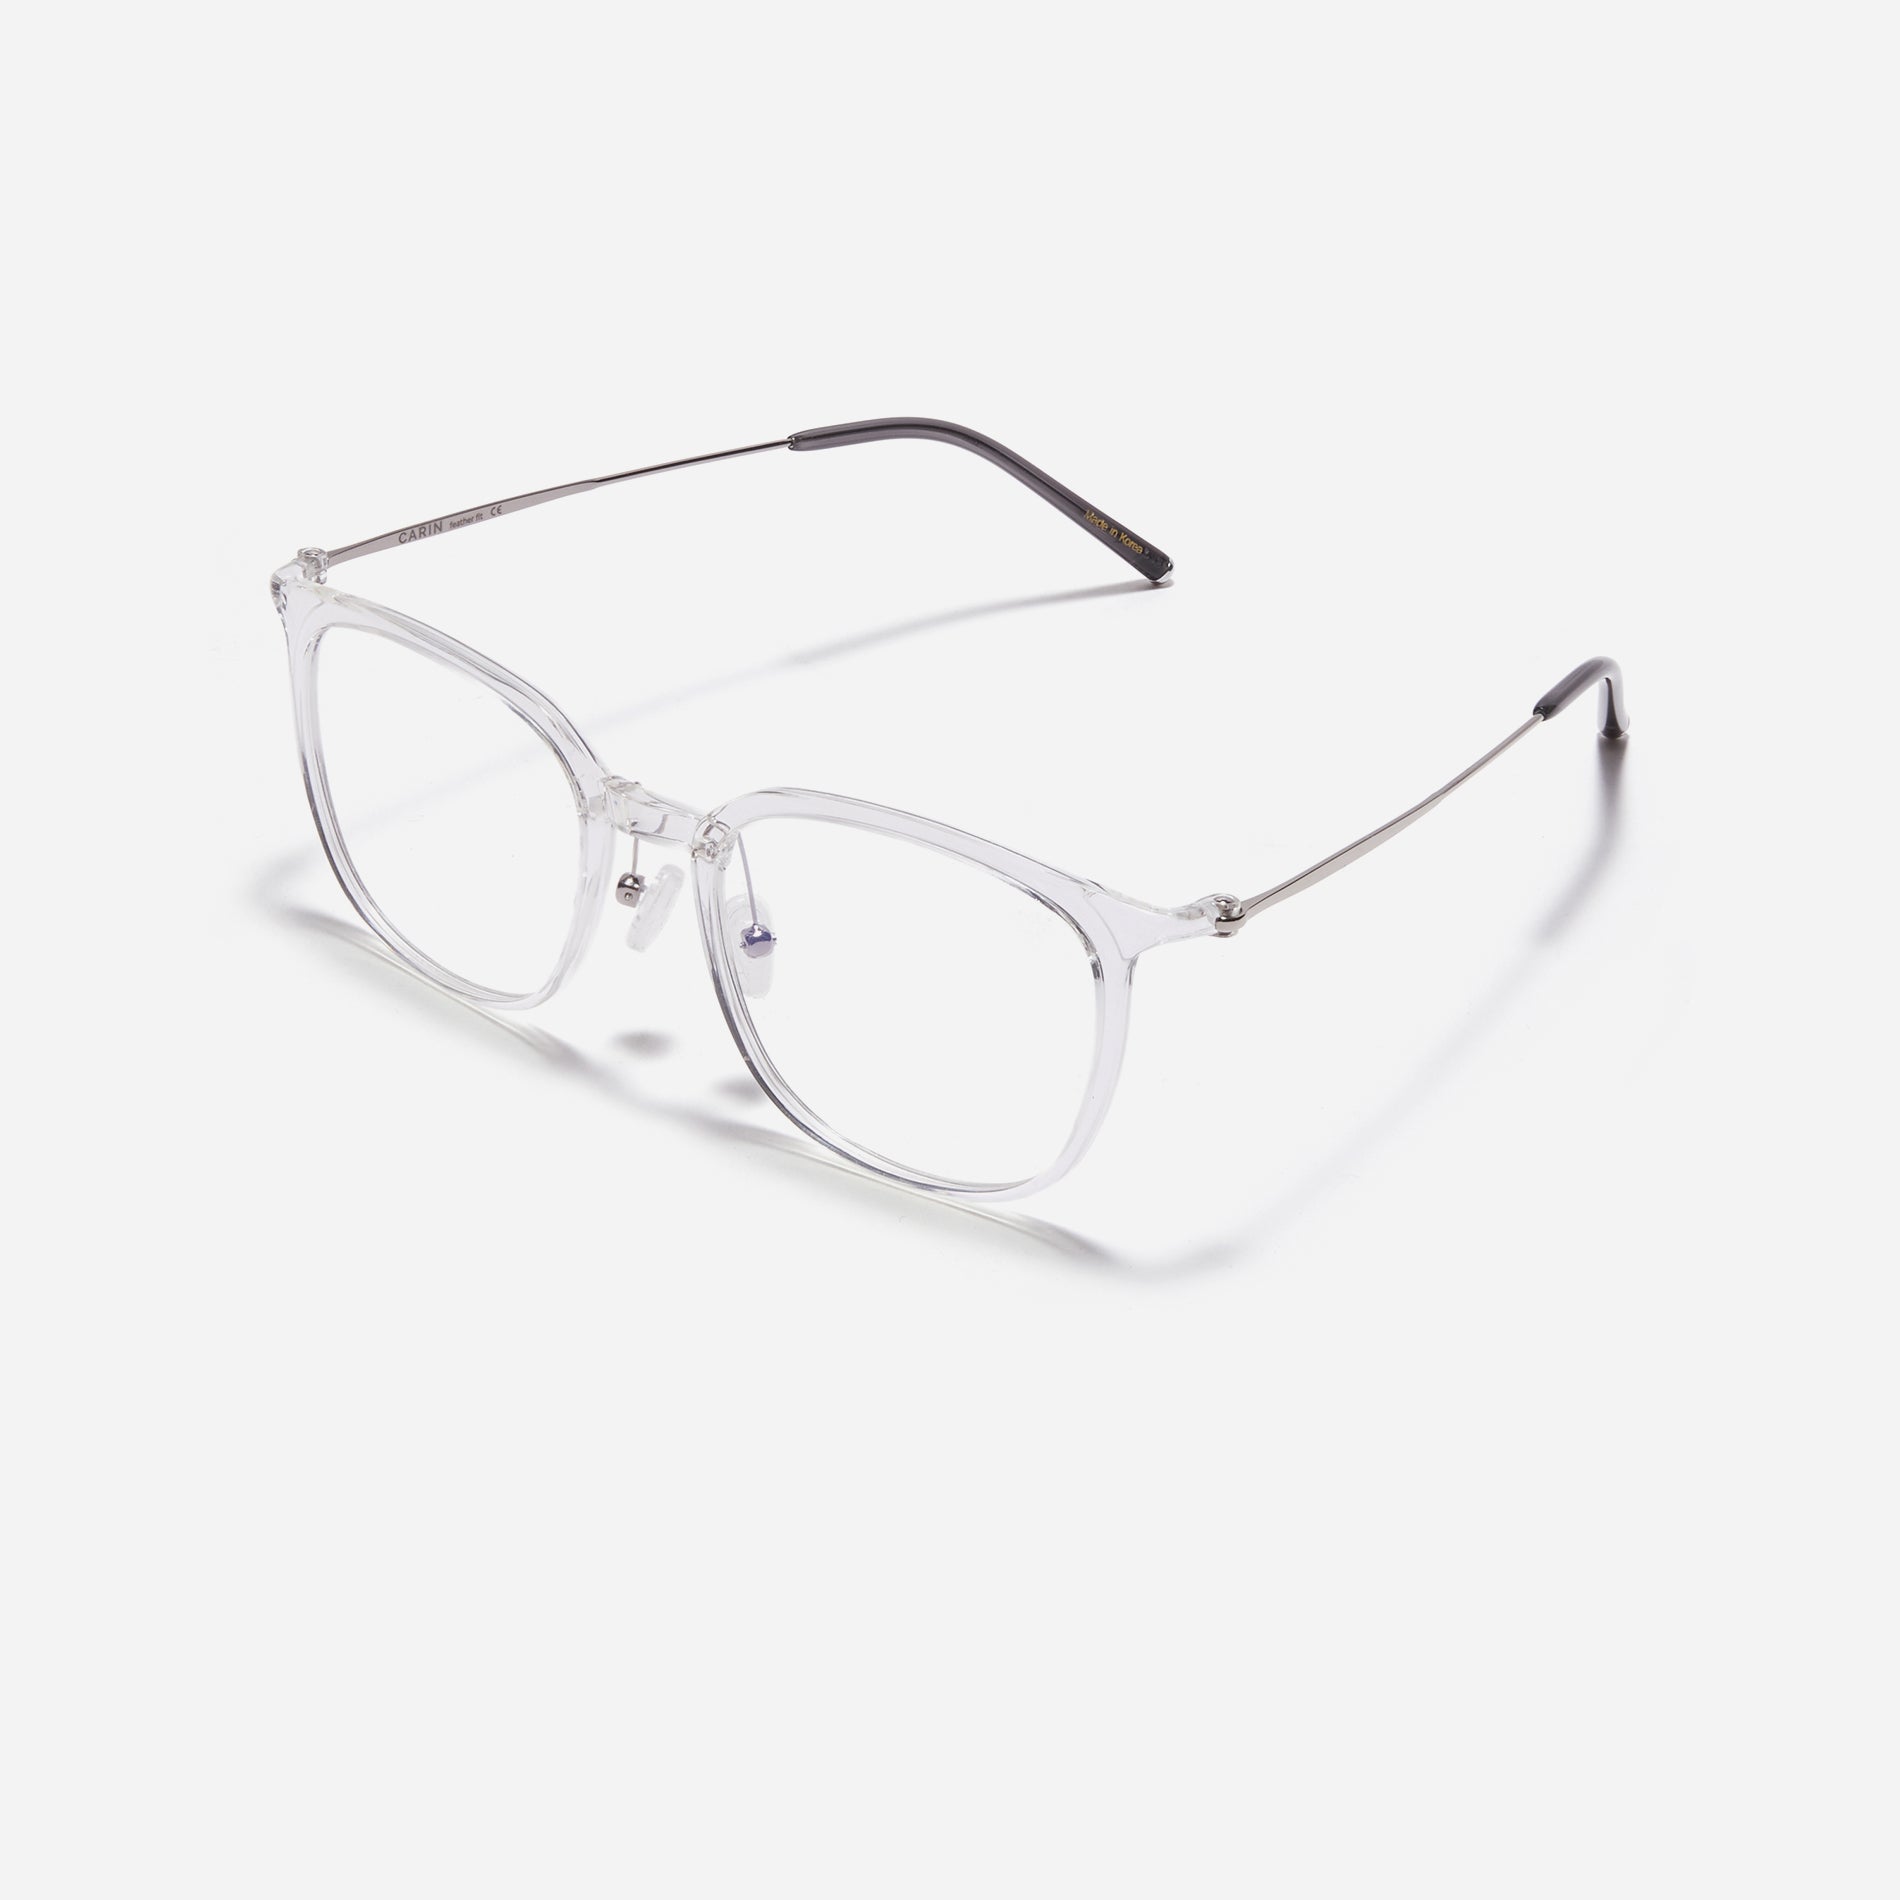 Ultra-lightweight, round square-shaped acetate eyeglasses that offer robust durability that resists breakage. Incorporated with CARIN's patented anti-loosening hinge technology, they ensure a consistently comfortable fit.